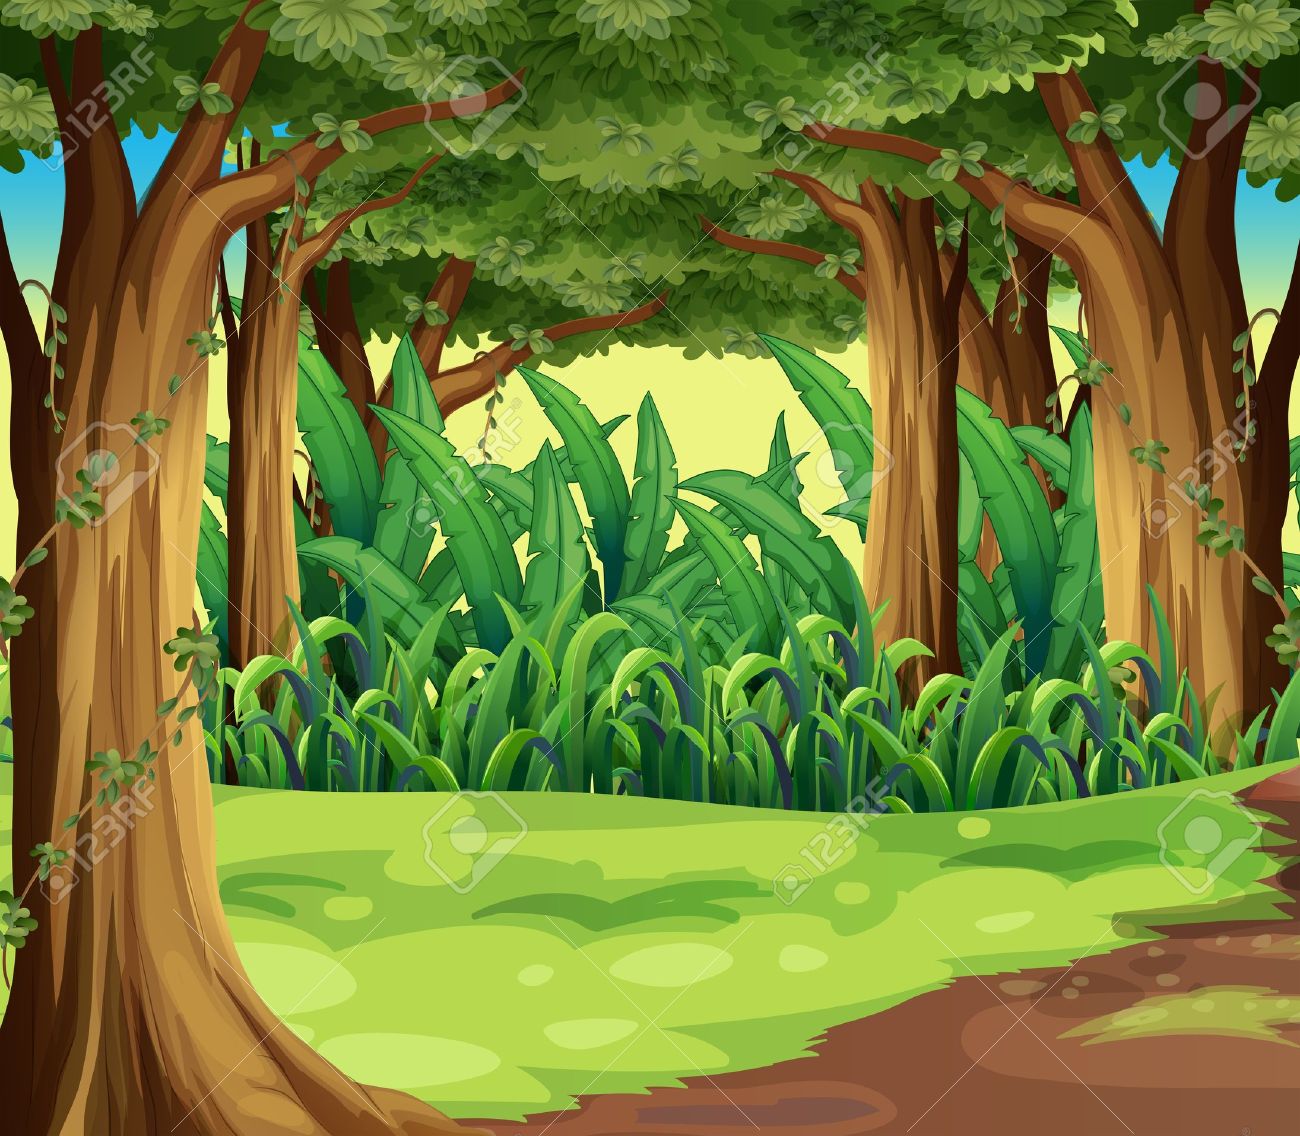 Forest background clipart.